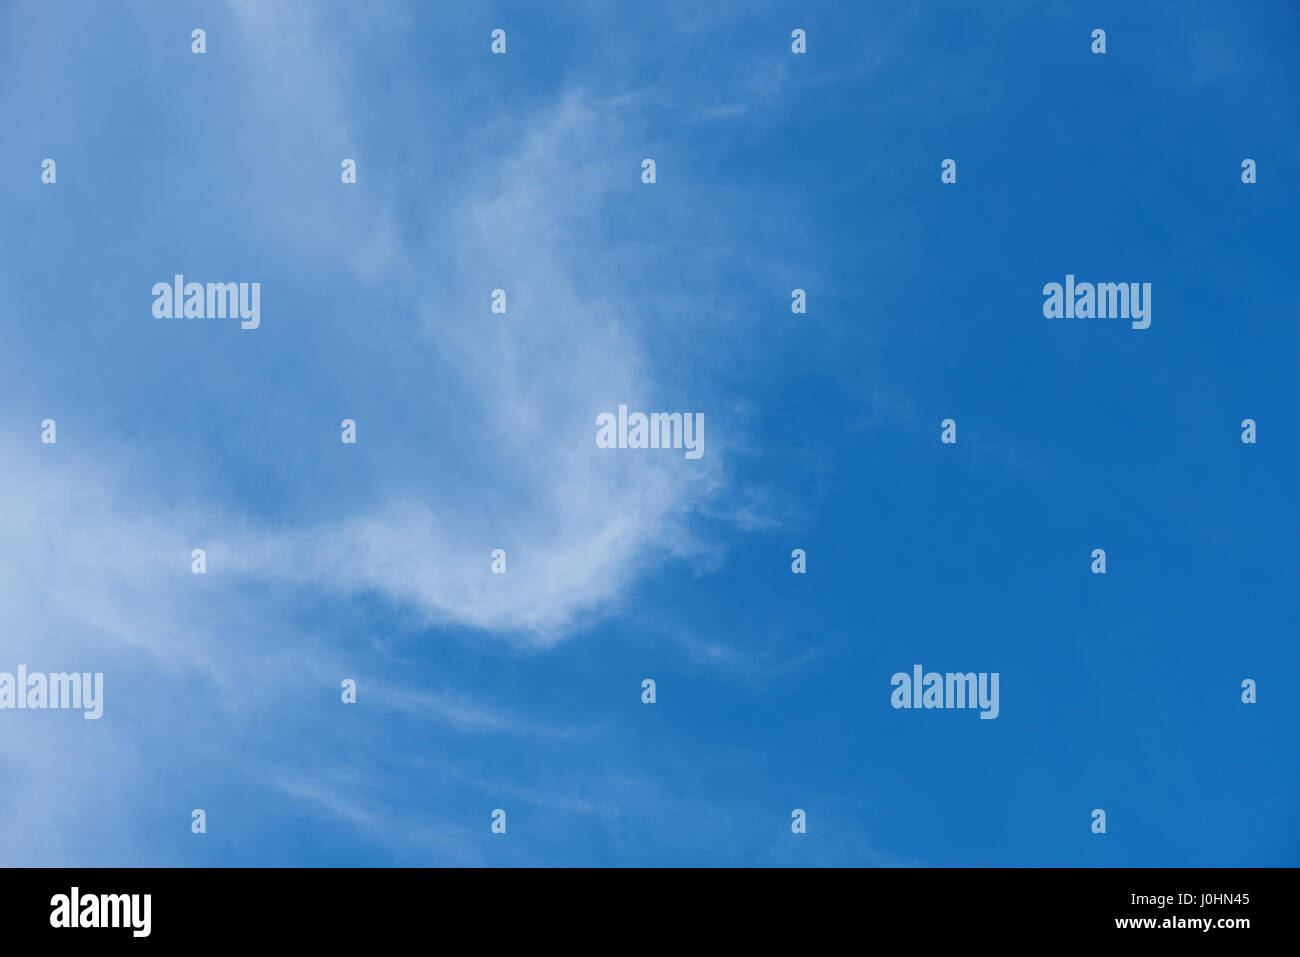 Abstract heaven background at day time. Blue sky pattern Stock Photo